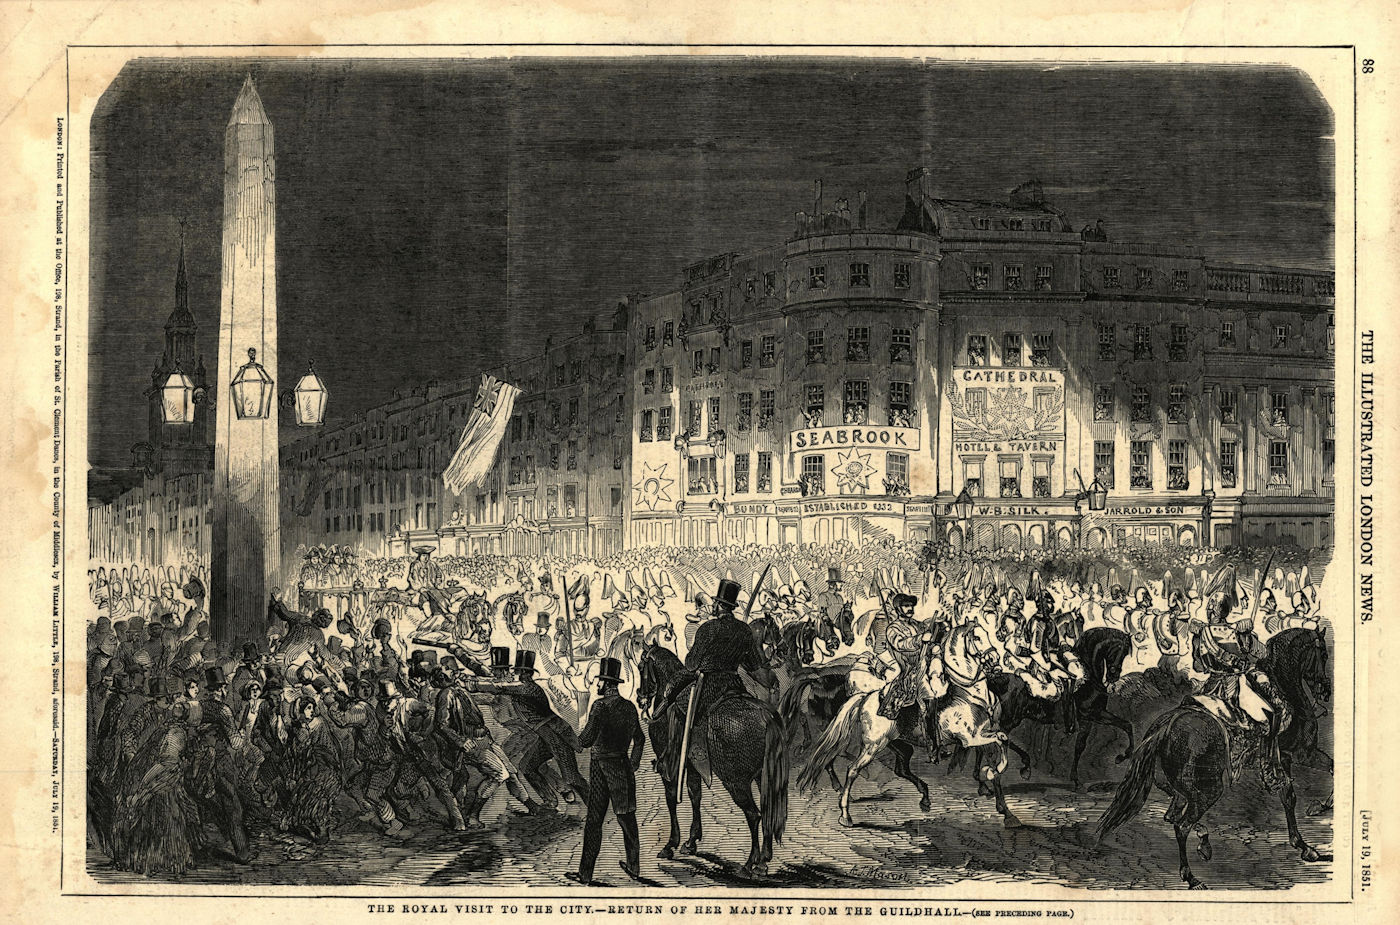 Royal visit to the City - return of Her Majesty from the Guildhall. London 1851